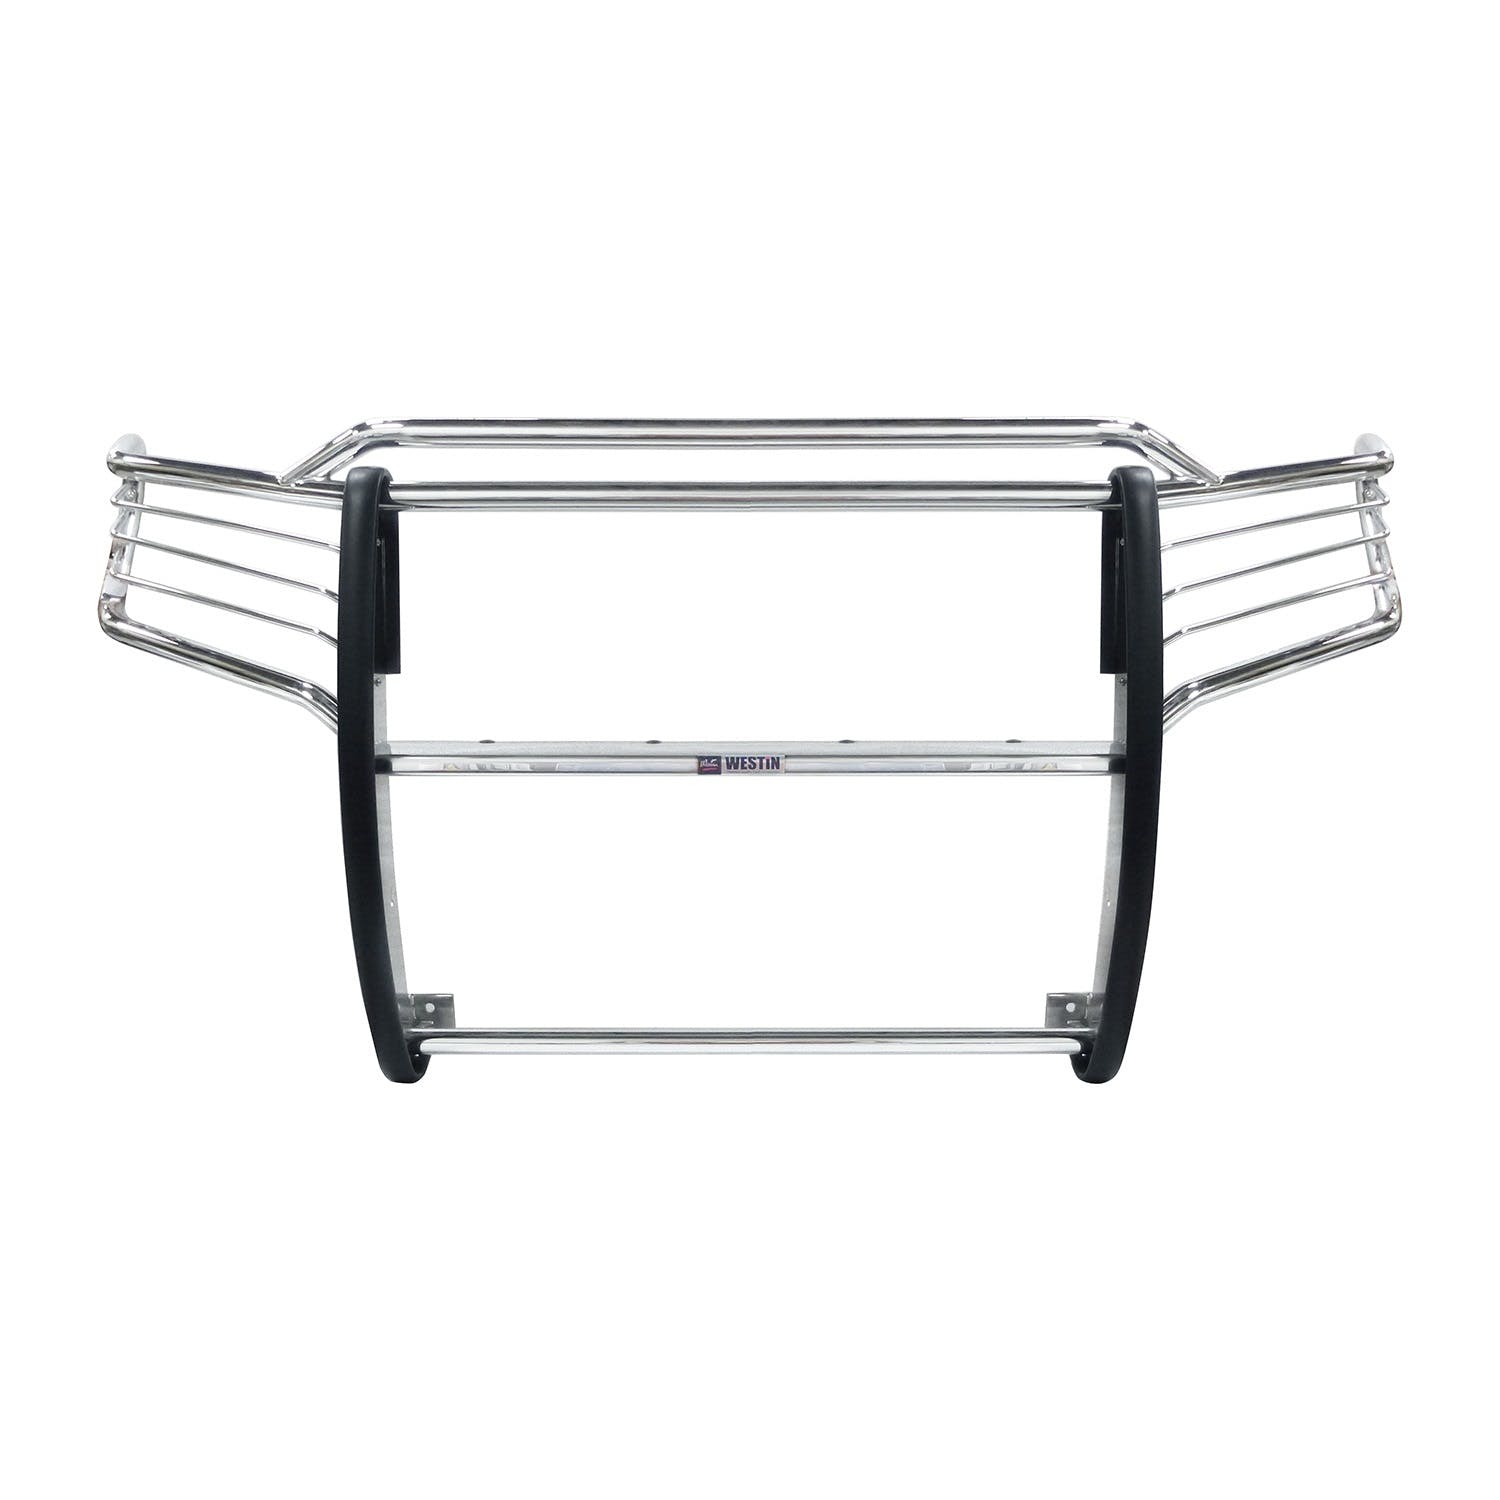 Westin Automotive 45-3700 Sportsman Grille Guard Stainless Steel